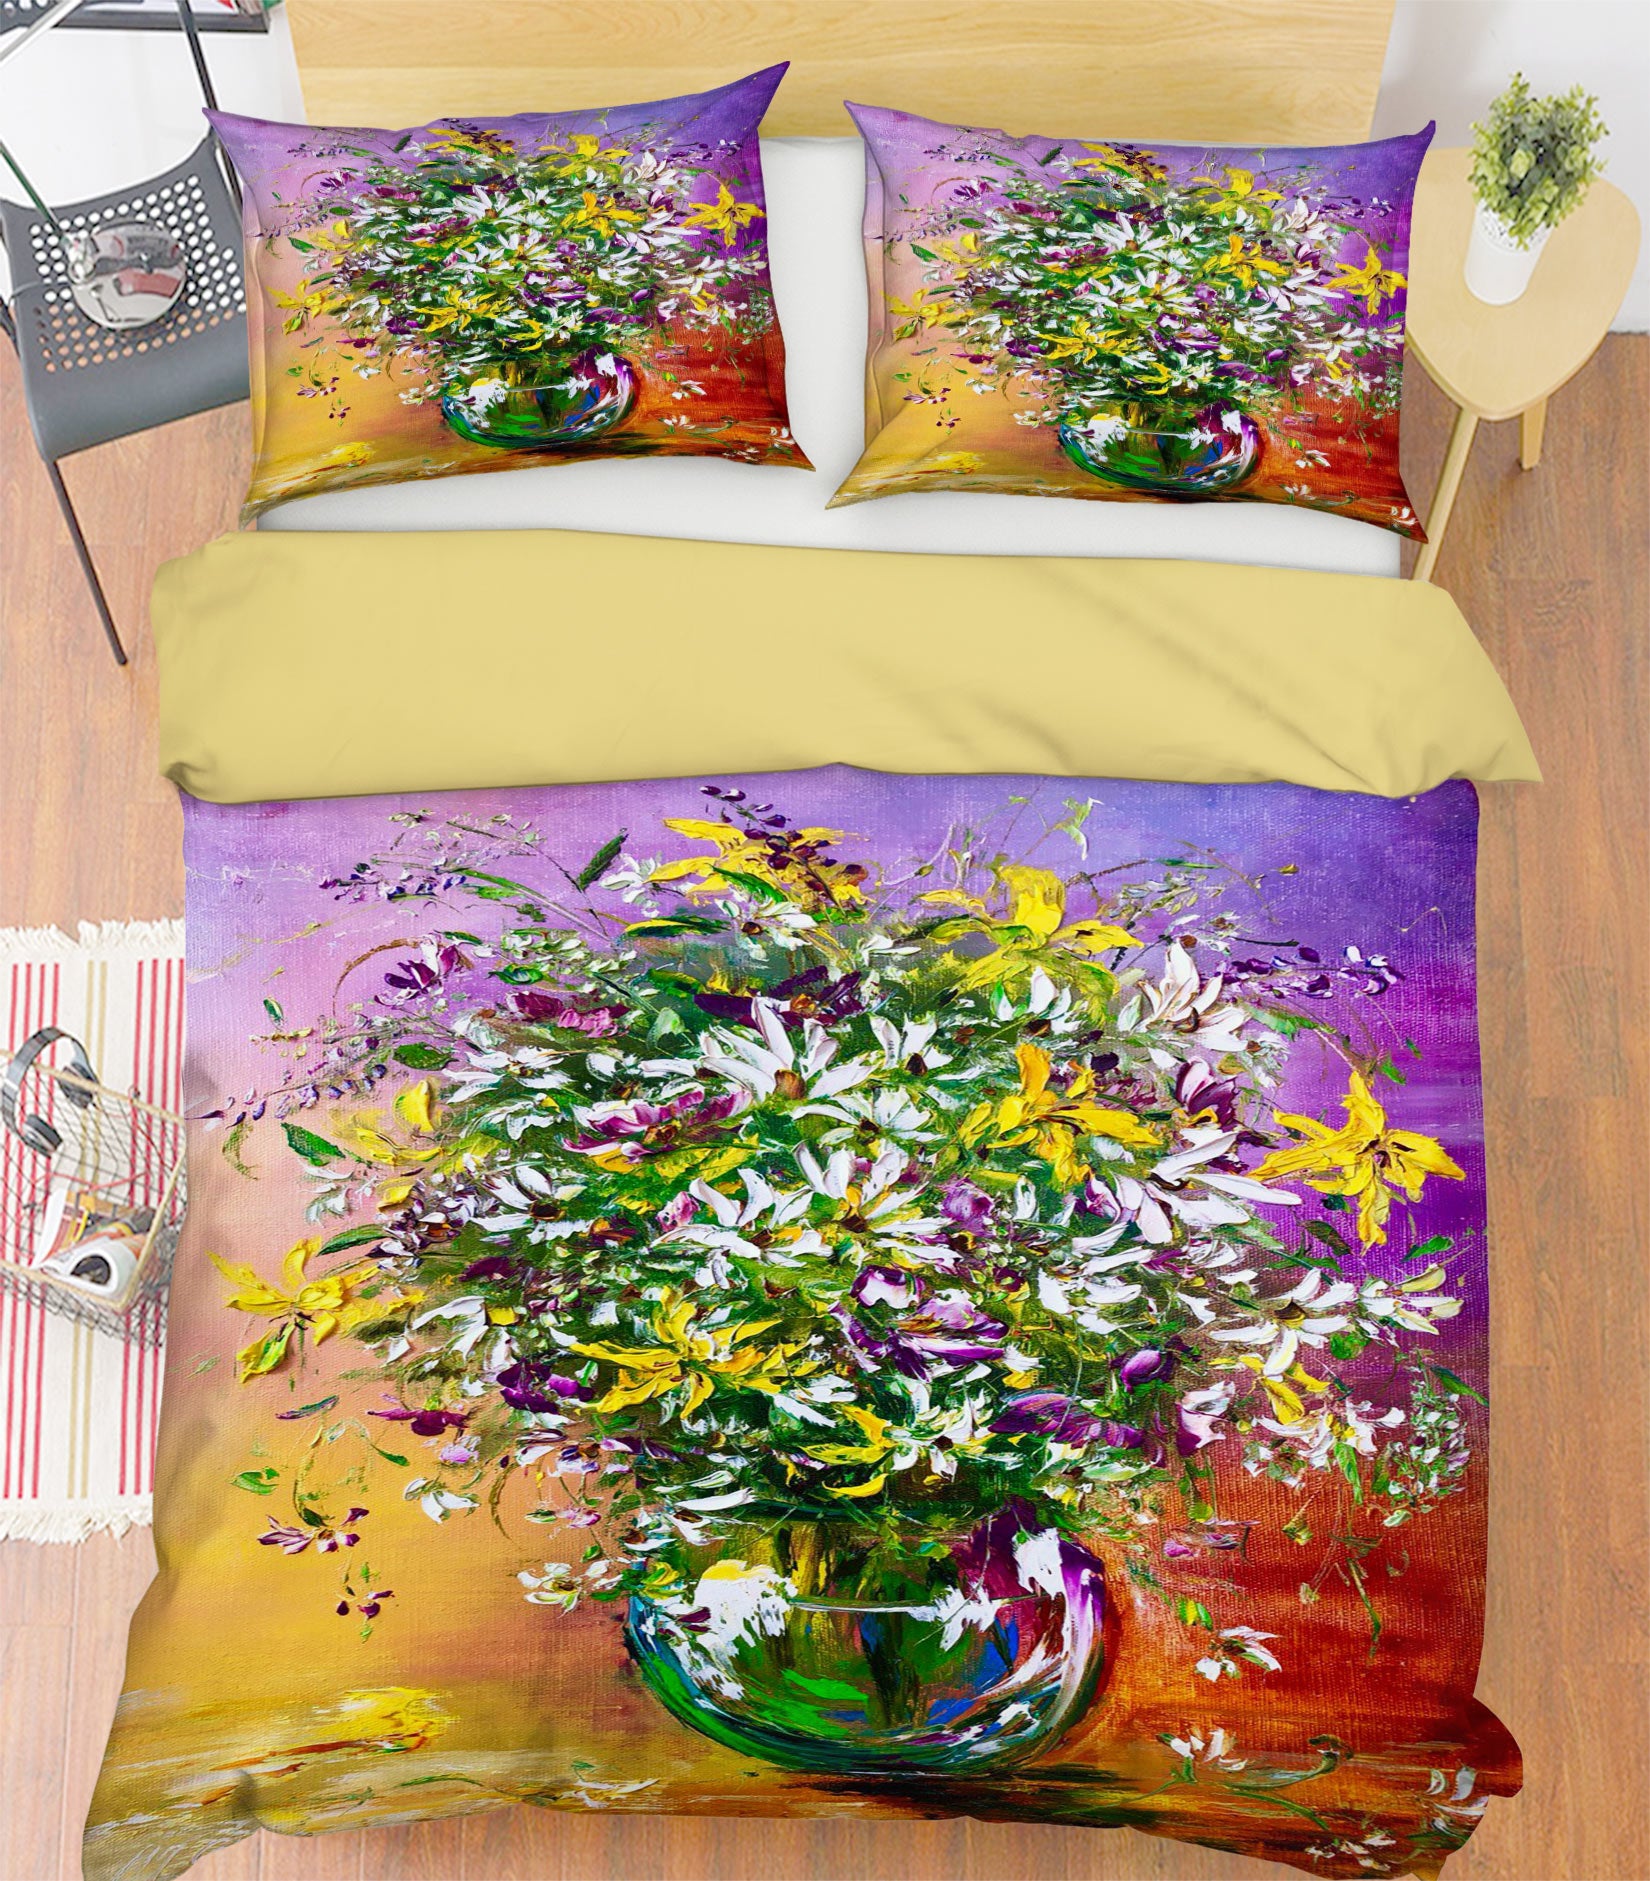 3D Colorful Bouquet 425 Skromova Marina Bedding Bed Pillowcases Quilt